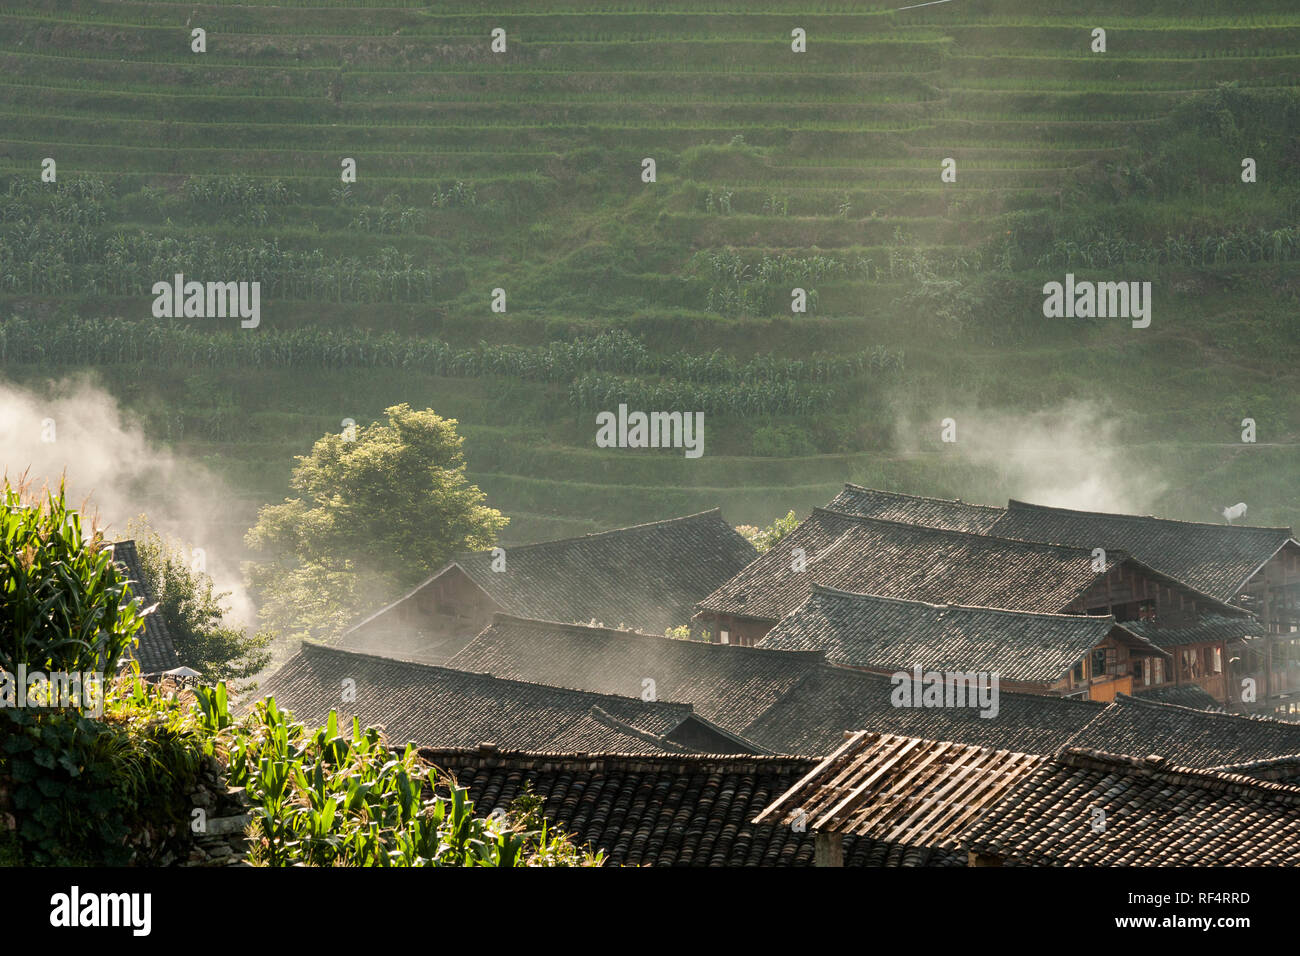 Rooftops and smoke in rice terraces landscape China Stock Photo